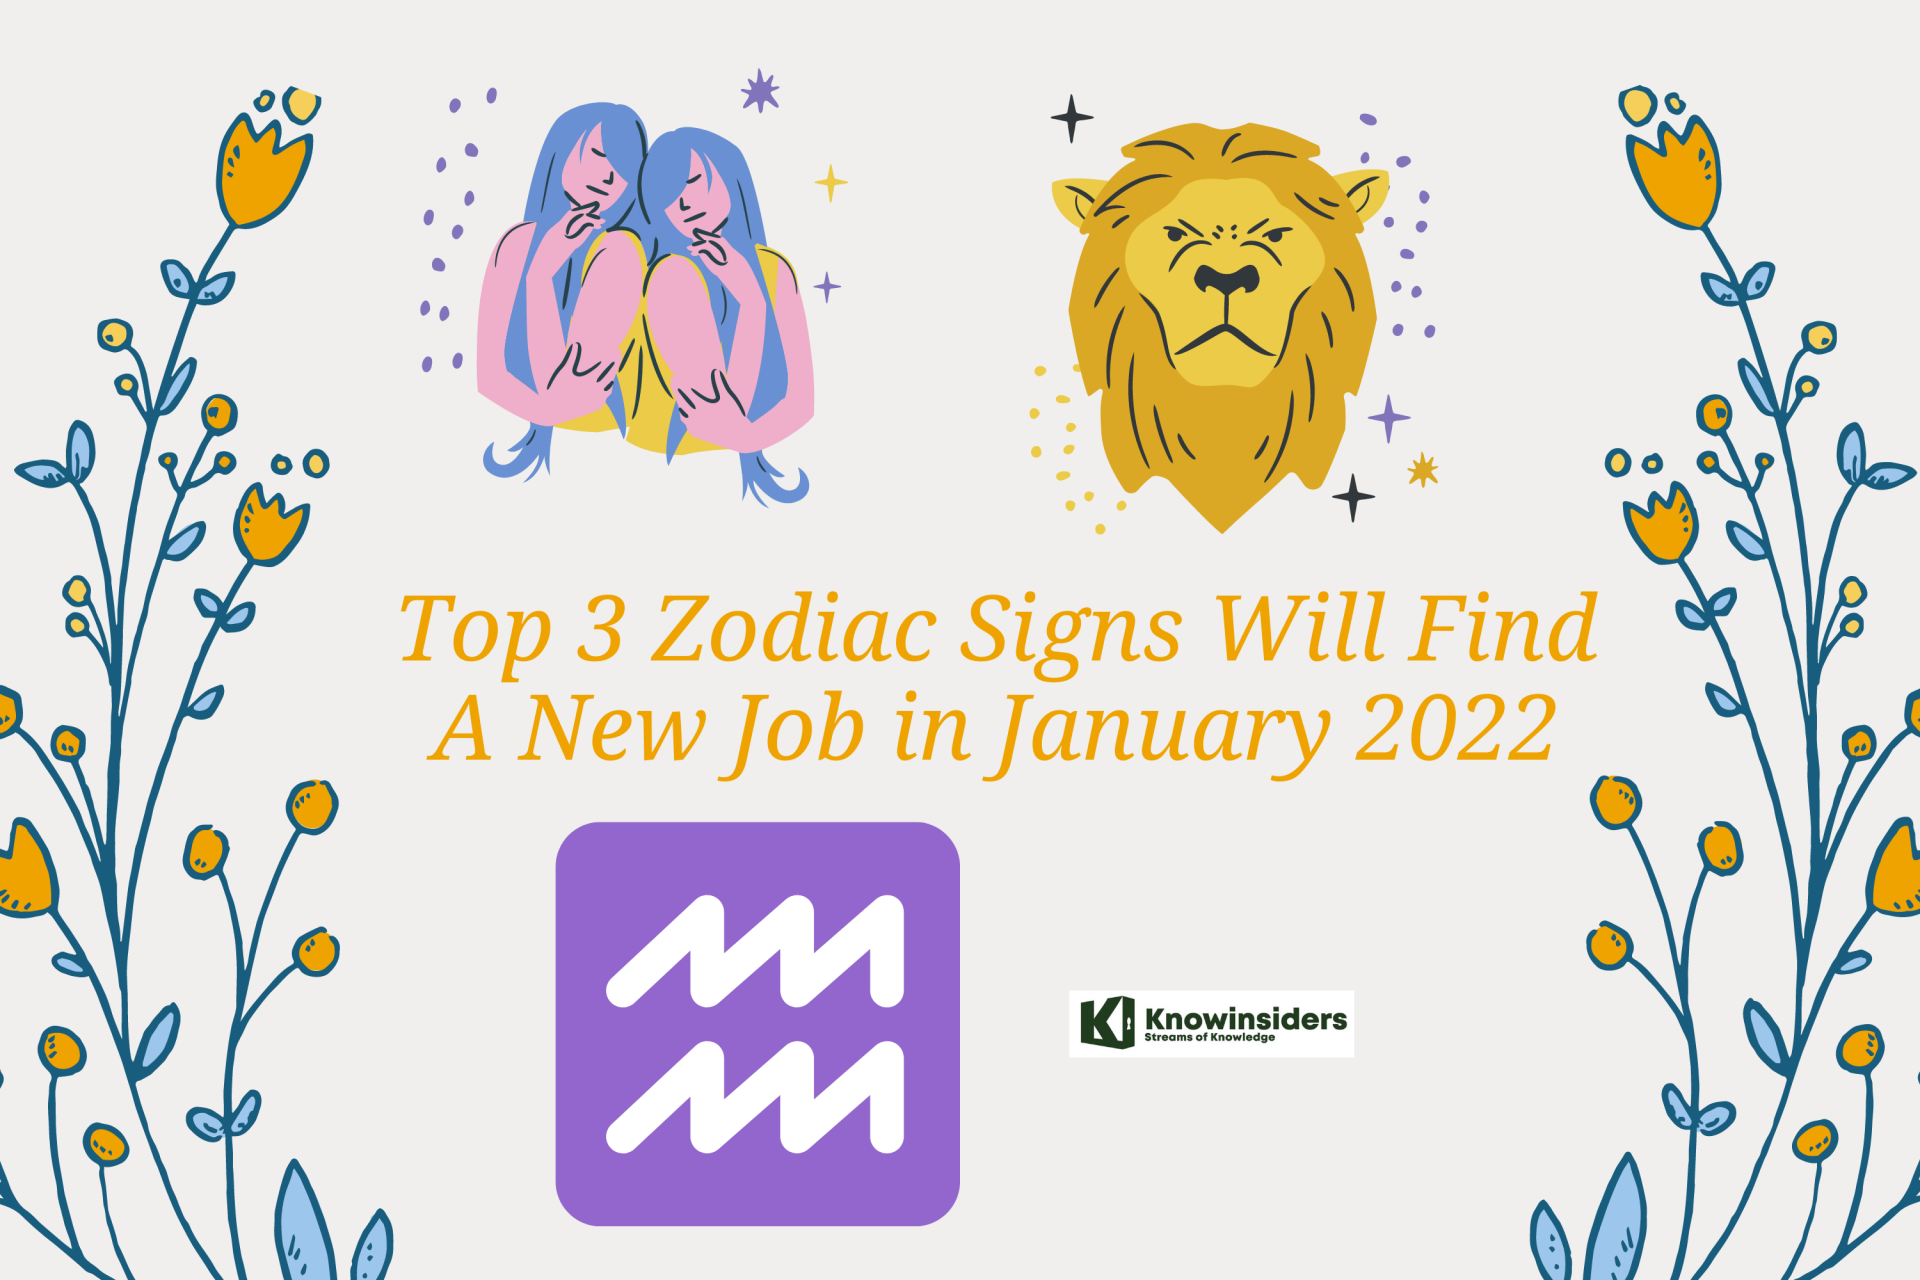 Top 3 Zodiac Signs Will Find A New Job in January 2022